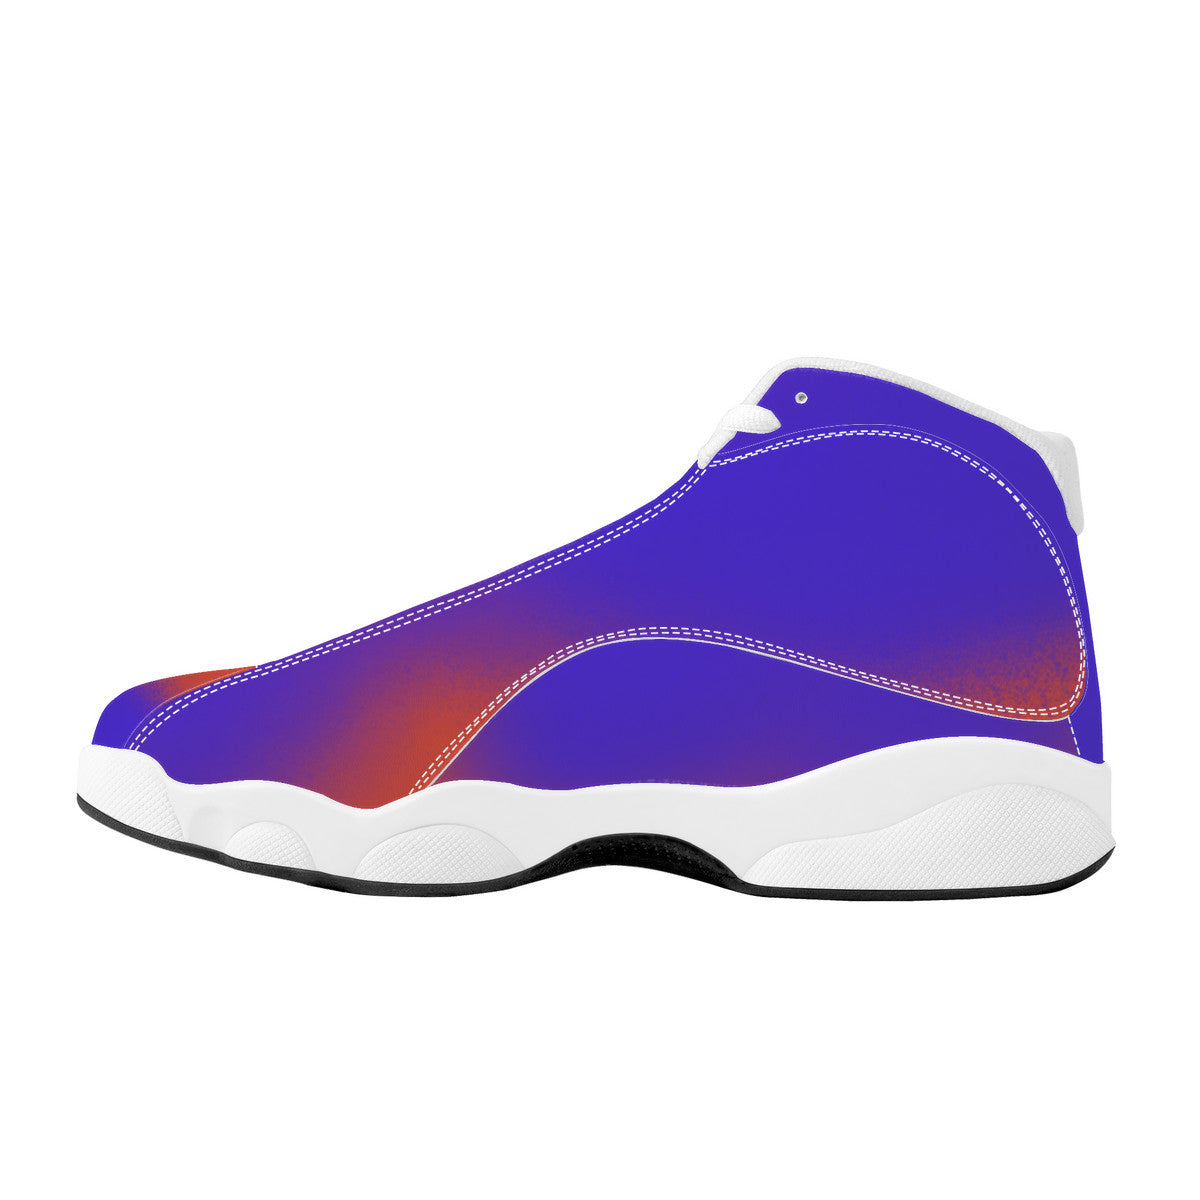 RVT Basketball Shoes - Blue Flame